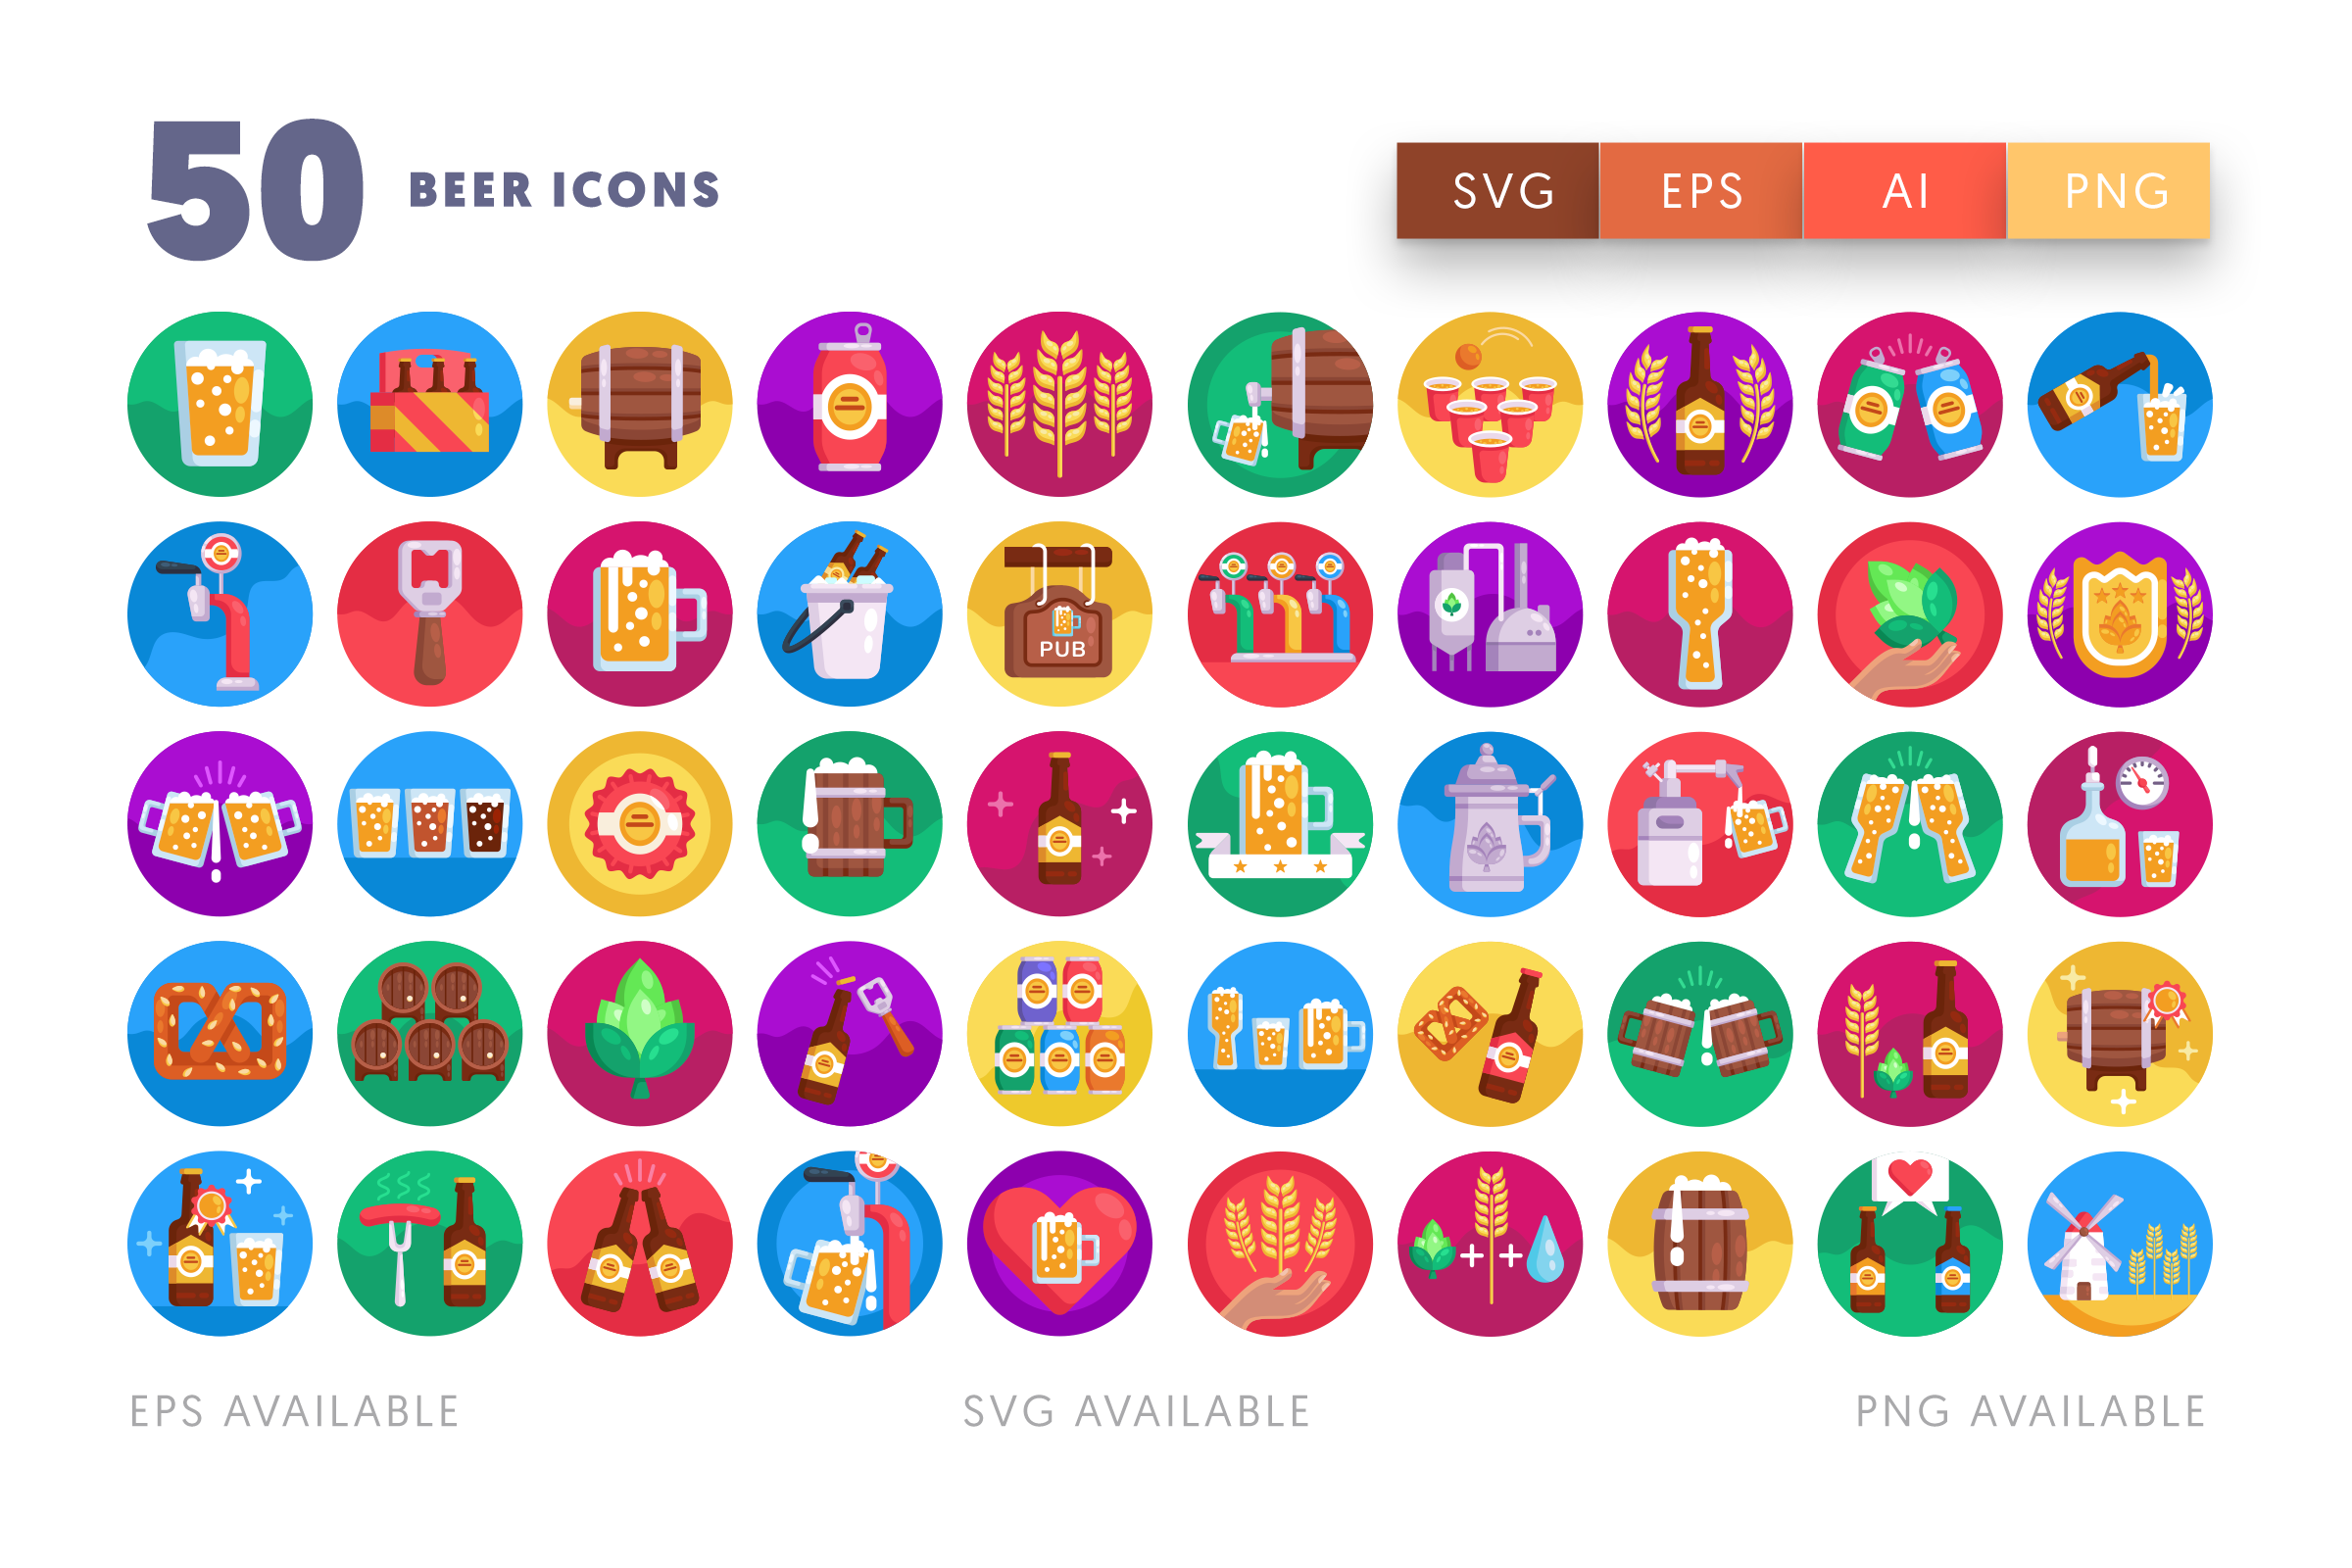 Beer icons png/svg/eps